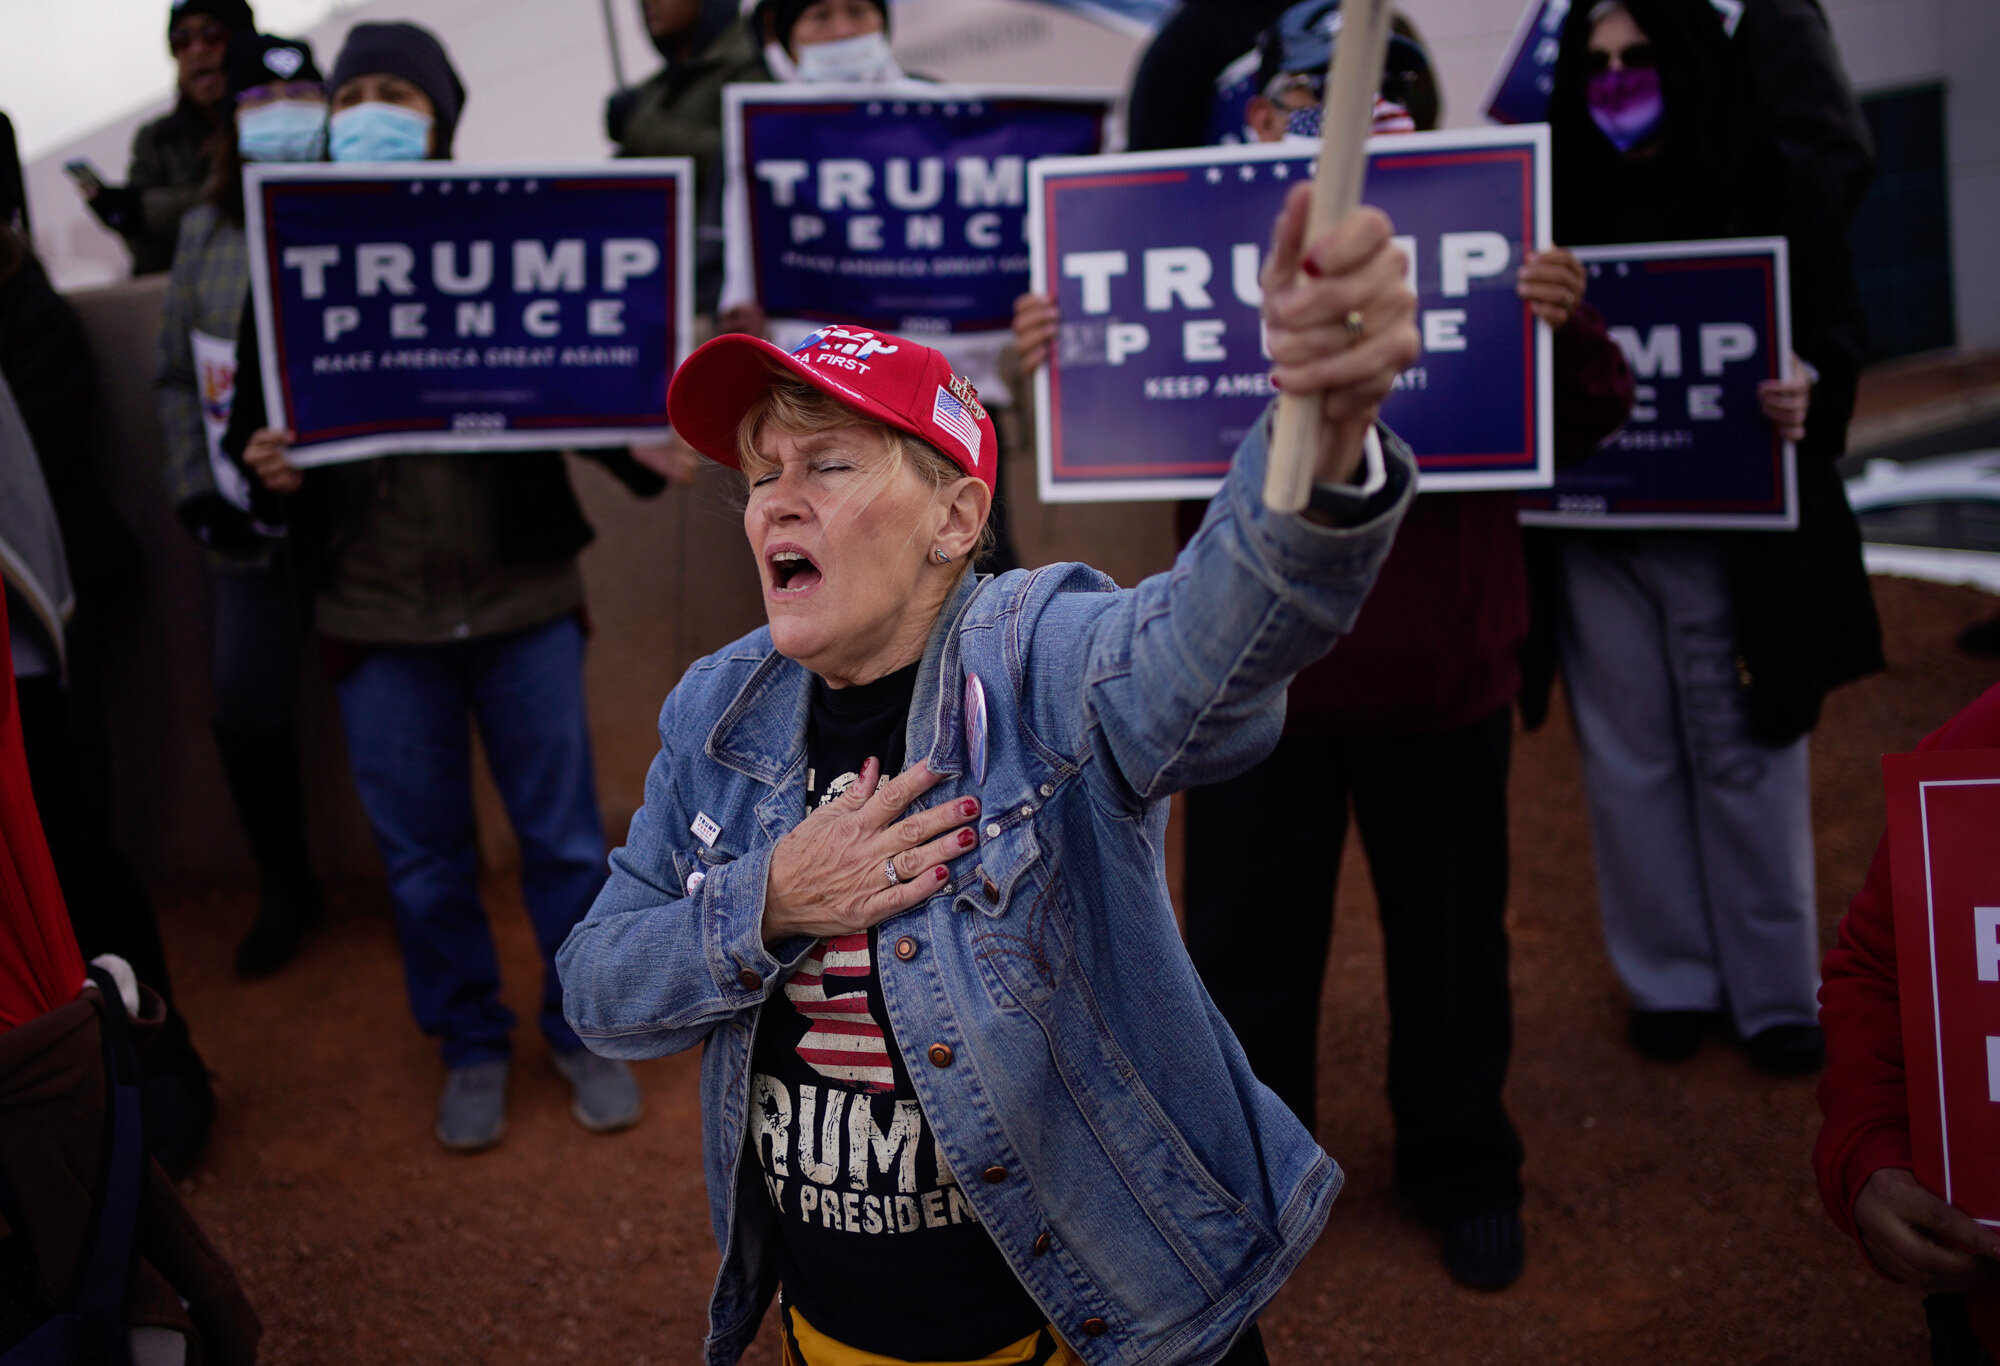  A supporter of President Donald Trump holds her hand over her heart during a protest of the election outside of the Clark County Election Department in North Las Vegas on Nov. 8, 2020. (AP Photo/John Locher) 